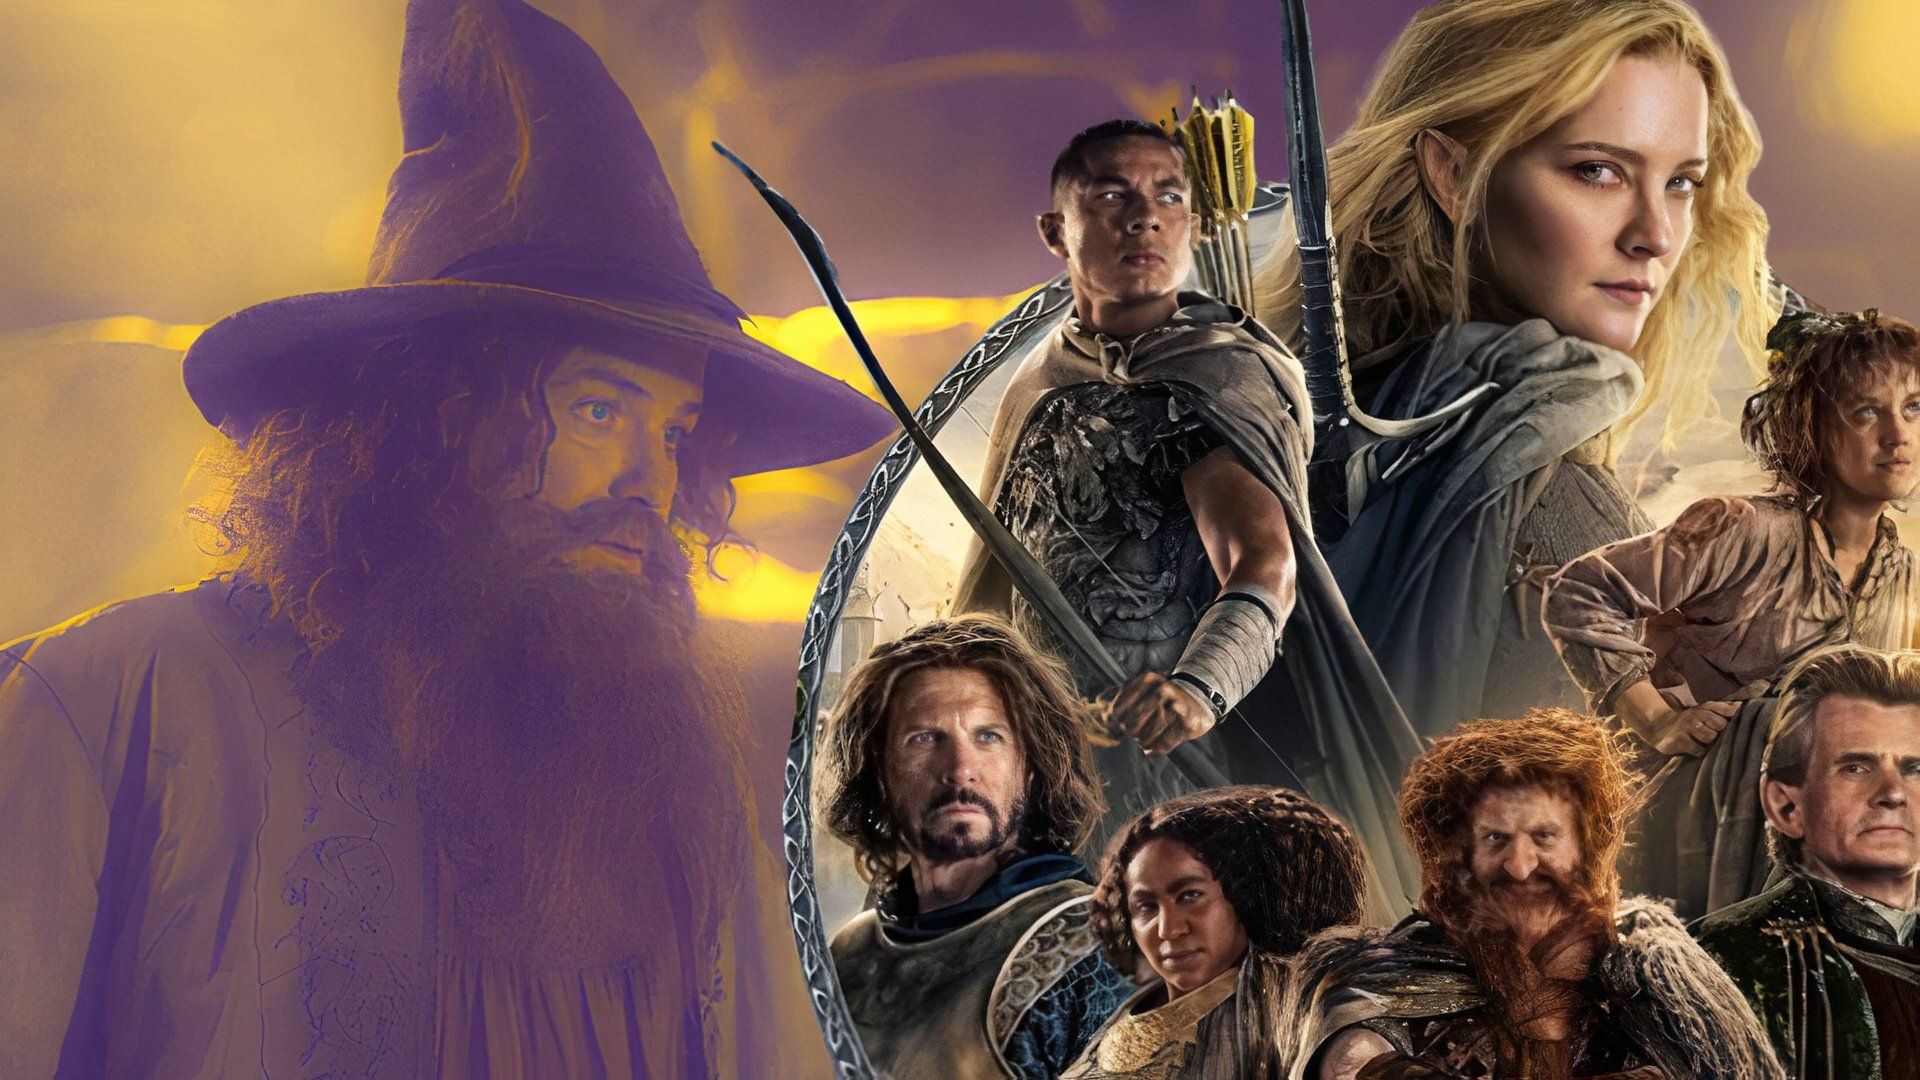 Tom Bombadil and the cast of Rings of Power.